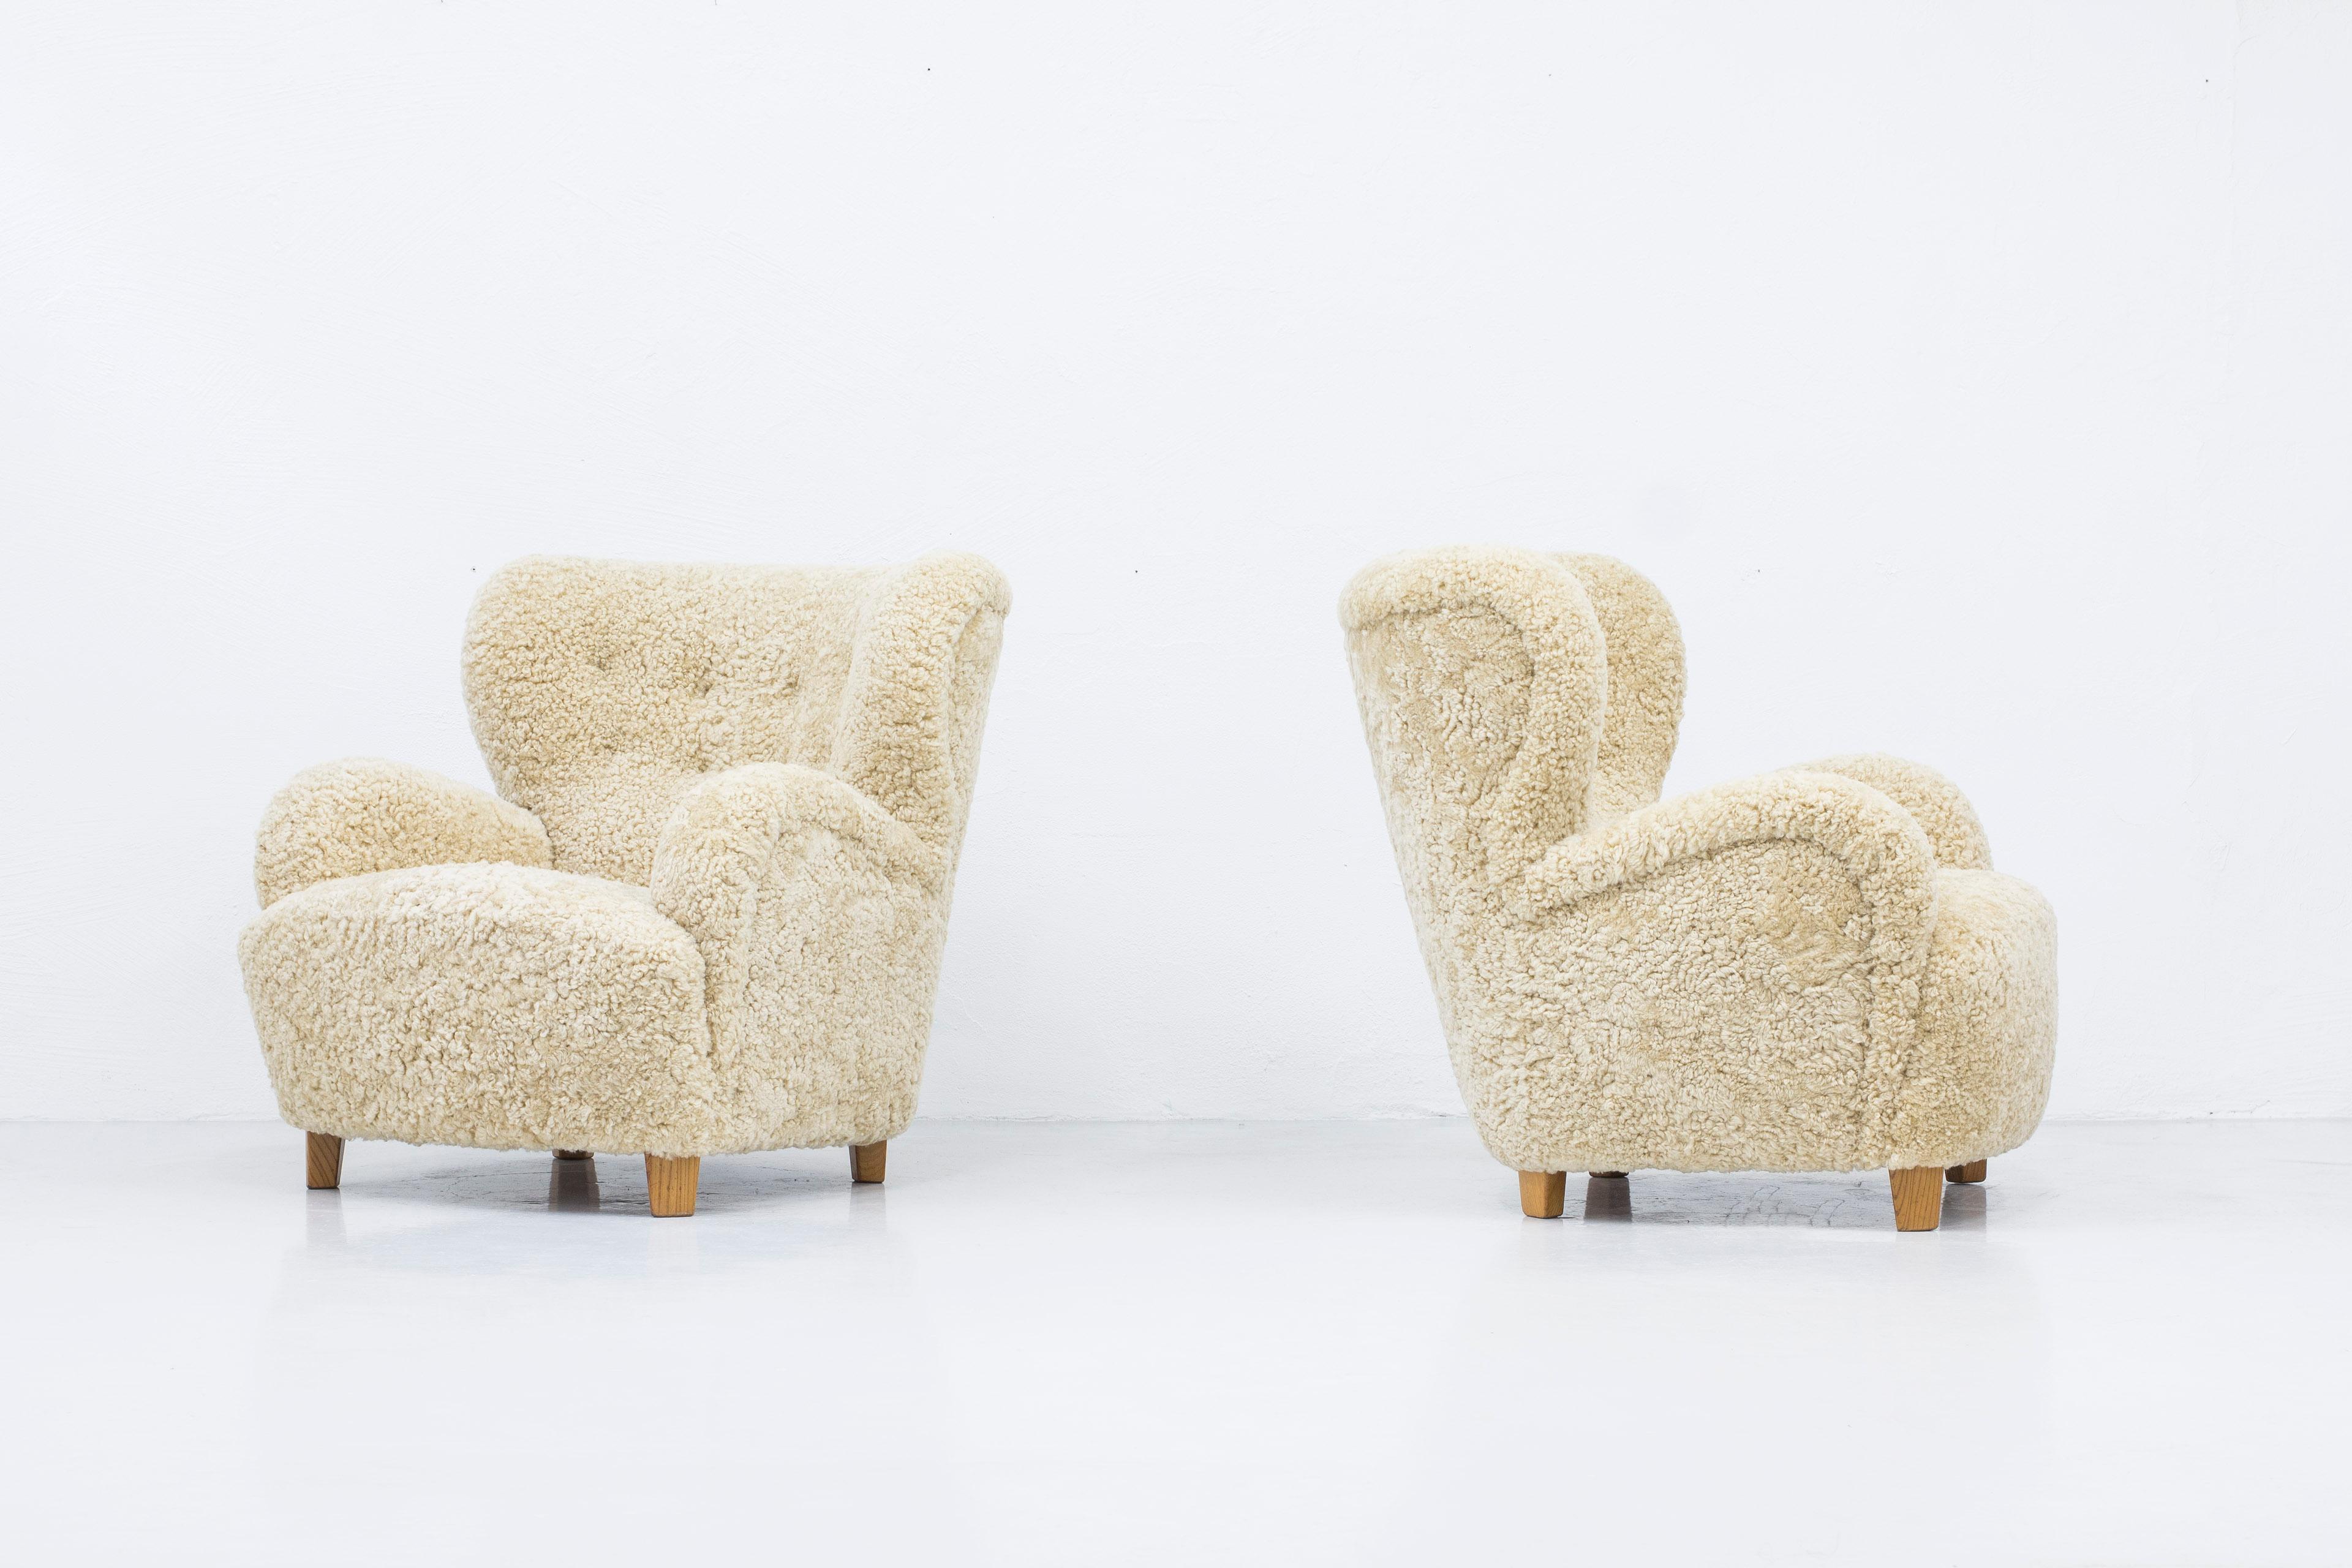 Danish modern lounge chairs similar to the style of Flemming Lassen. Produced in Denmark during the 1930-40s. Solid elm feet and new upholstery in sheepskin/shearling in a light beige color. Beautiful organic lines and excellent quality. Upholstery